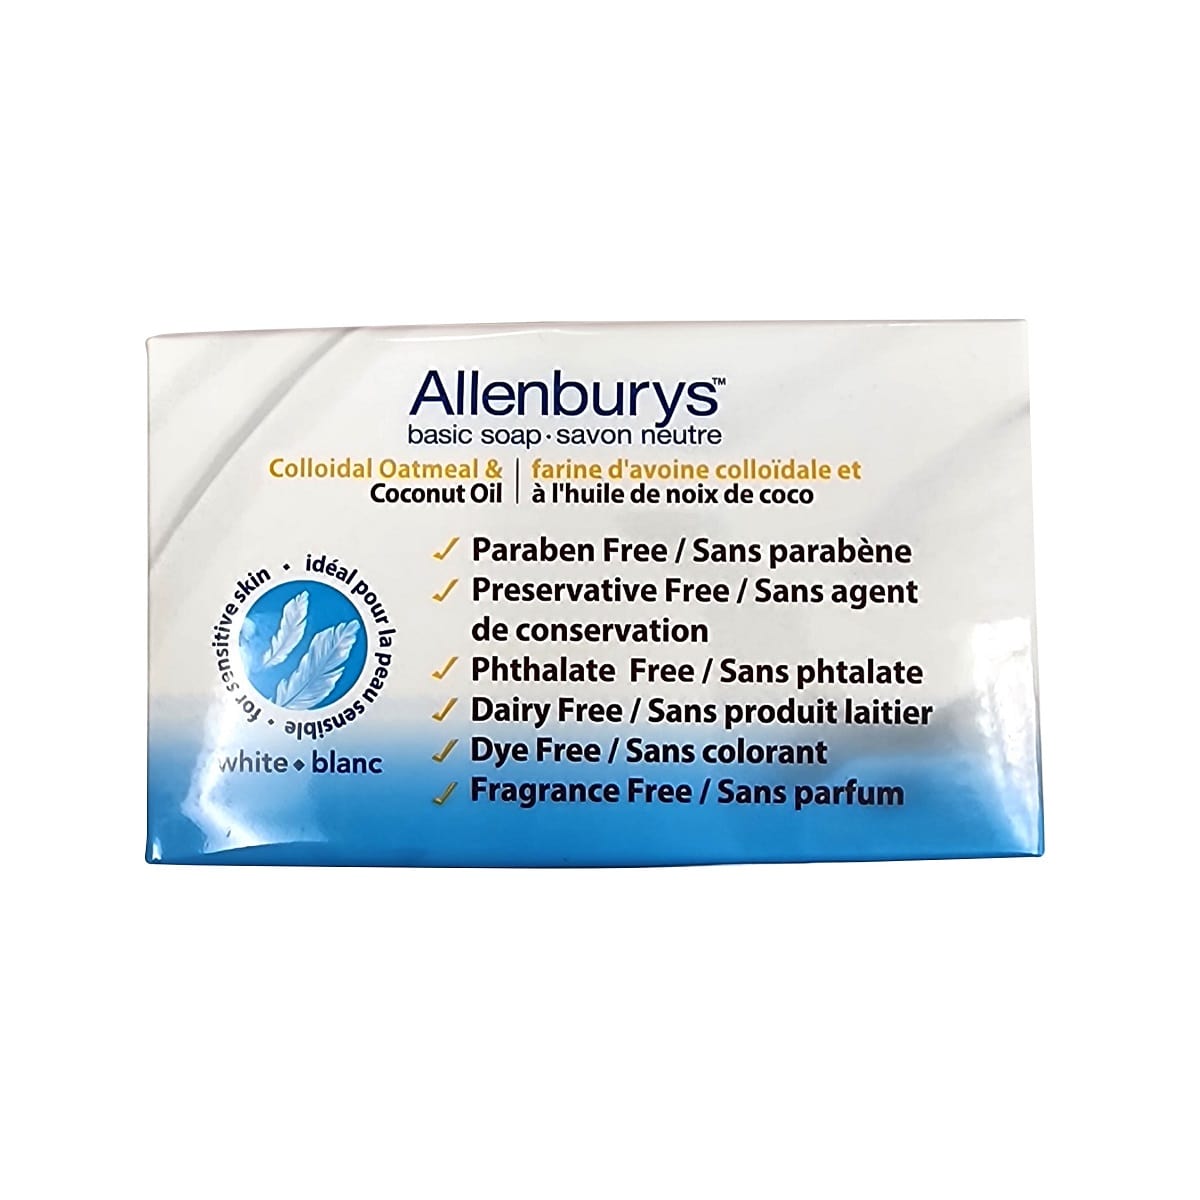 Features for Allenburys Colloidal Oatmeal and Coconut Oil Soap for Sensitive Skin (2 x 100 grams)